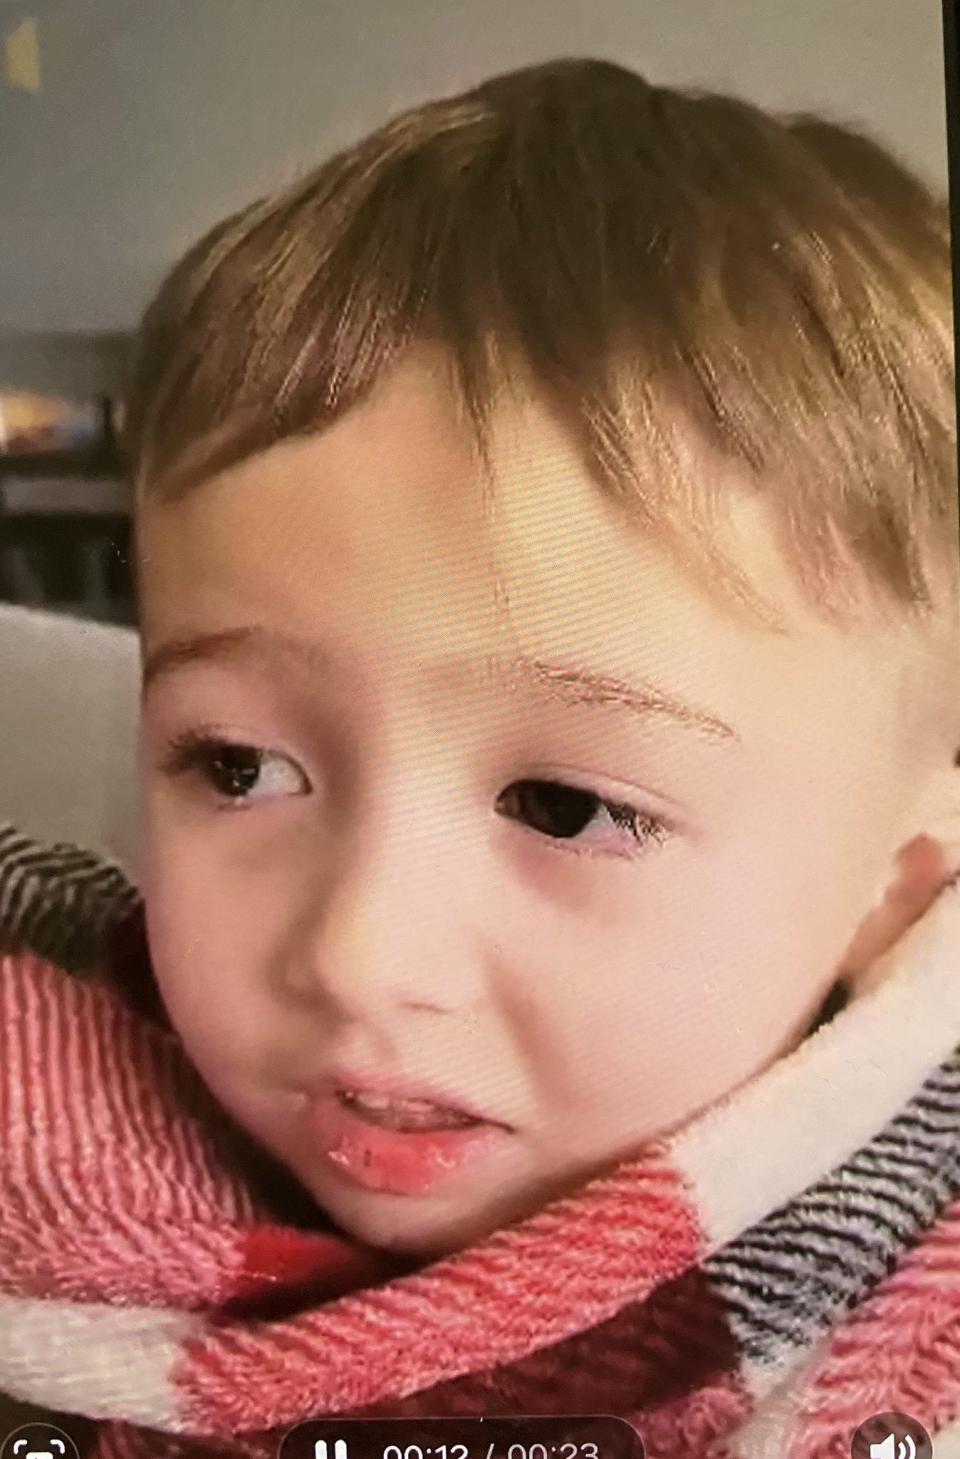 Elijah Vue, a 3-year-old from Two Rivers, Wisconsin, has been missing since Tuesday, Feb. 20. The Two Rivers Police Department has asked the public for help with finding him.